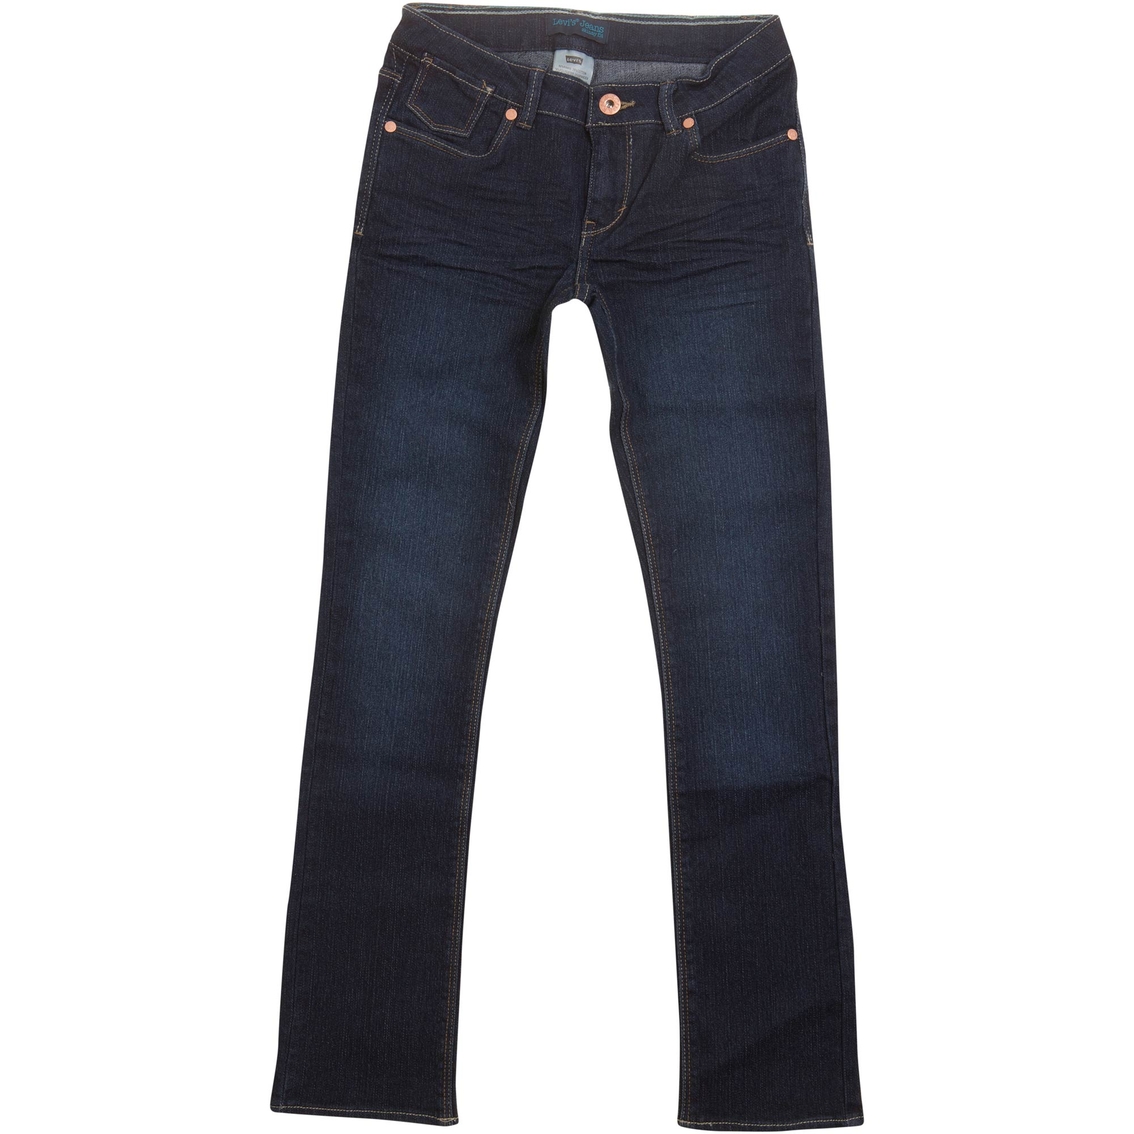 Levi's Girls Skinny Jeans | Girls 7-16 | Clothing & Accessories | Shop ...